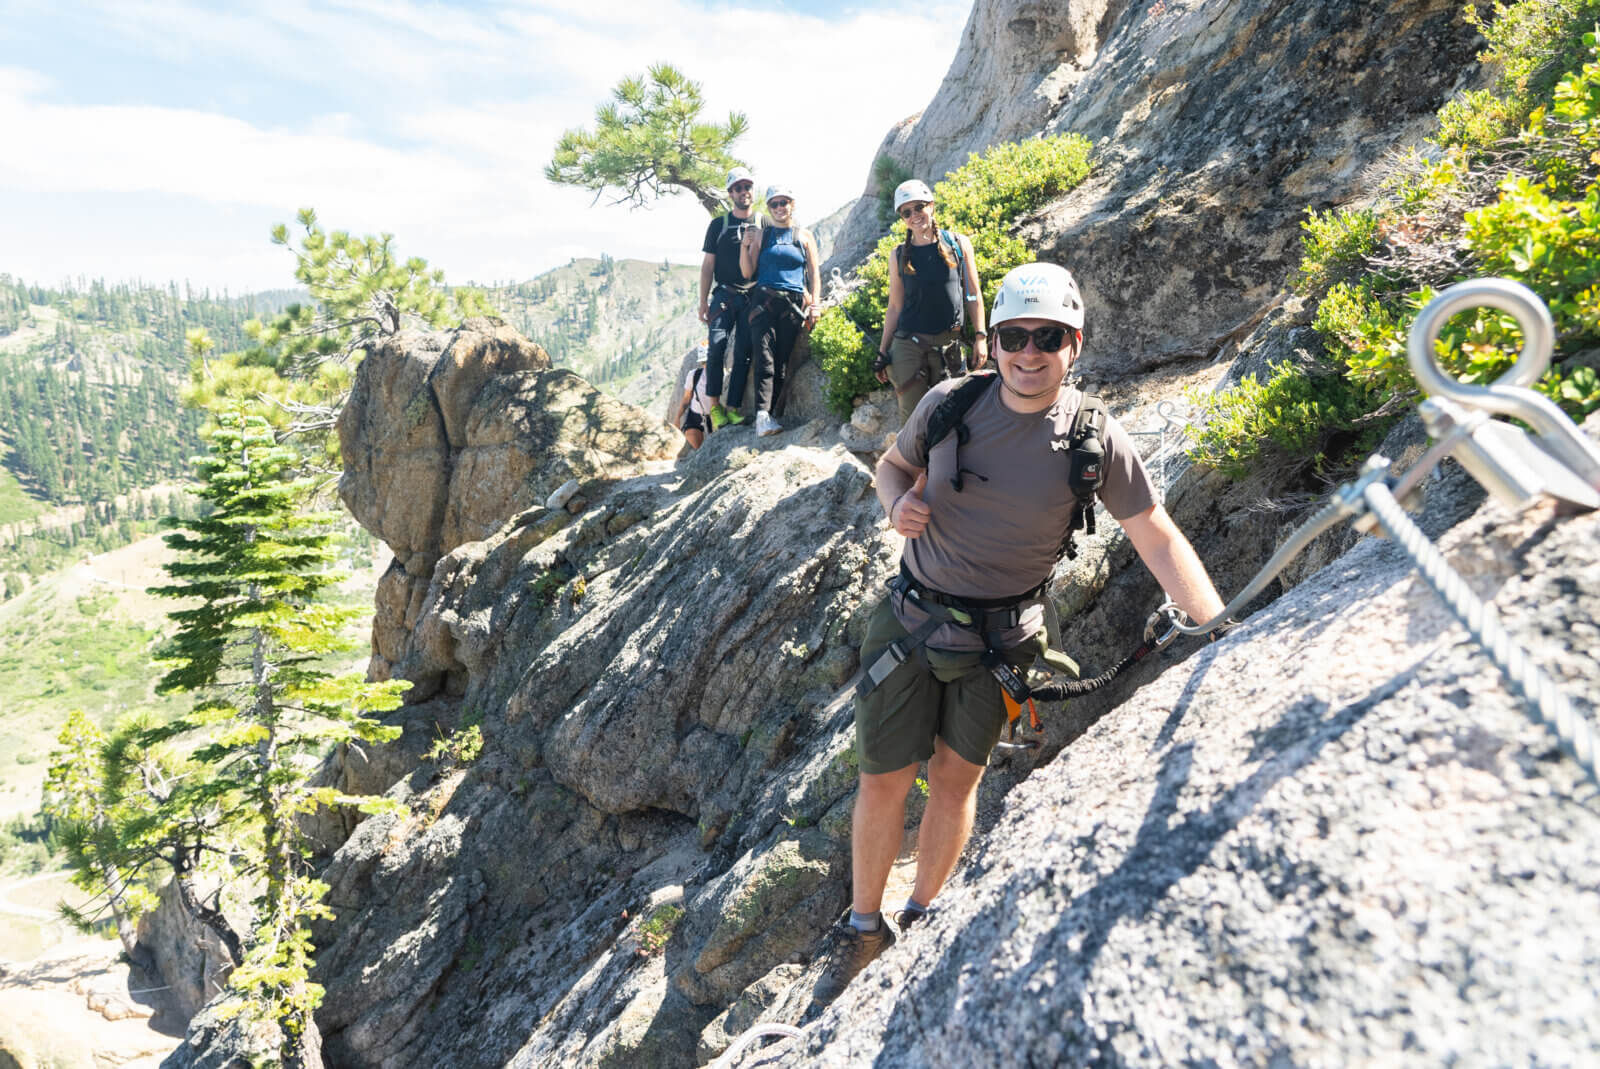 A group climbing the Tahoe Via Ferrata at Palisades Tahoe in Olympic Valley. One of the best Lake Tahoe adventures!